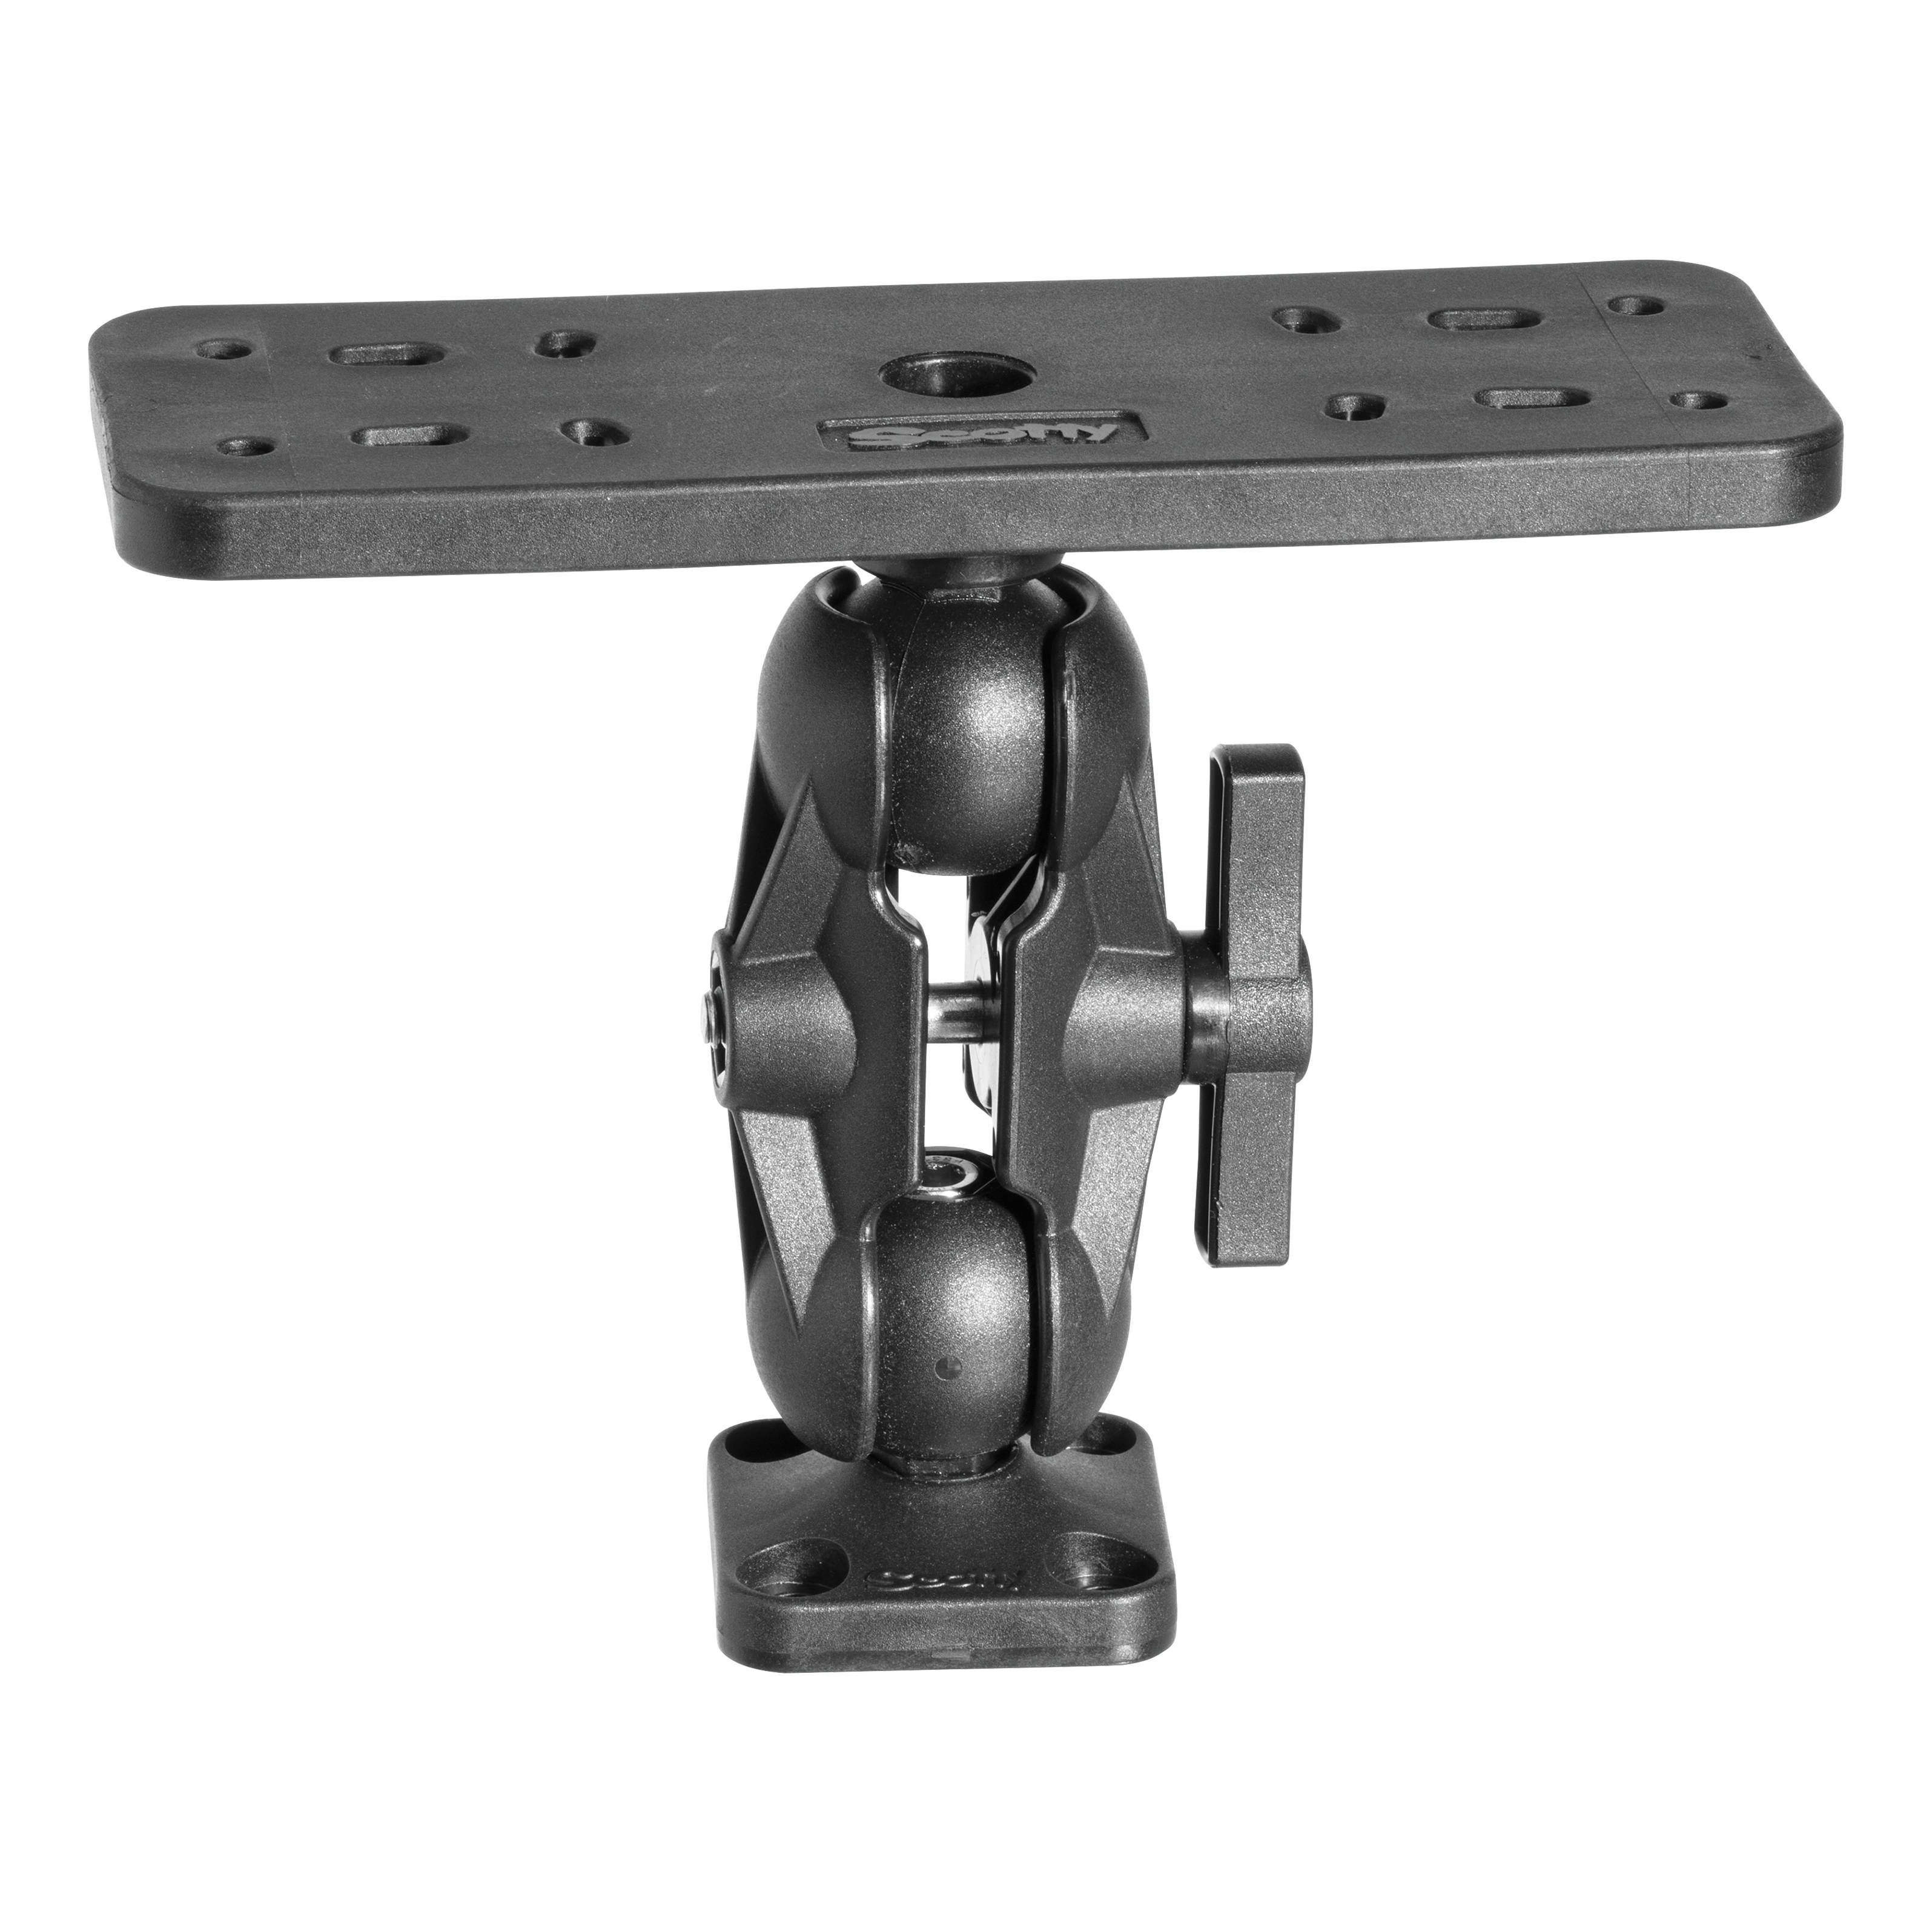 Scotty® Ball Mount with Fish Finder and Universal Mounting Plate